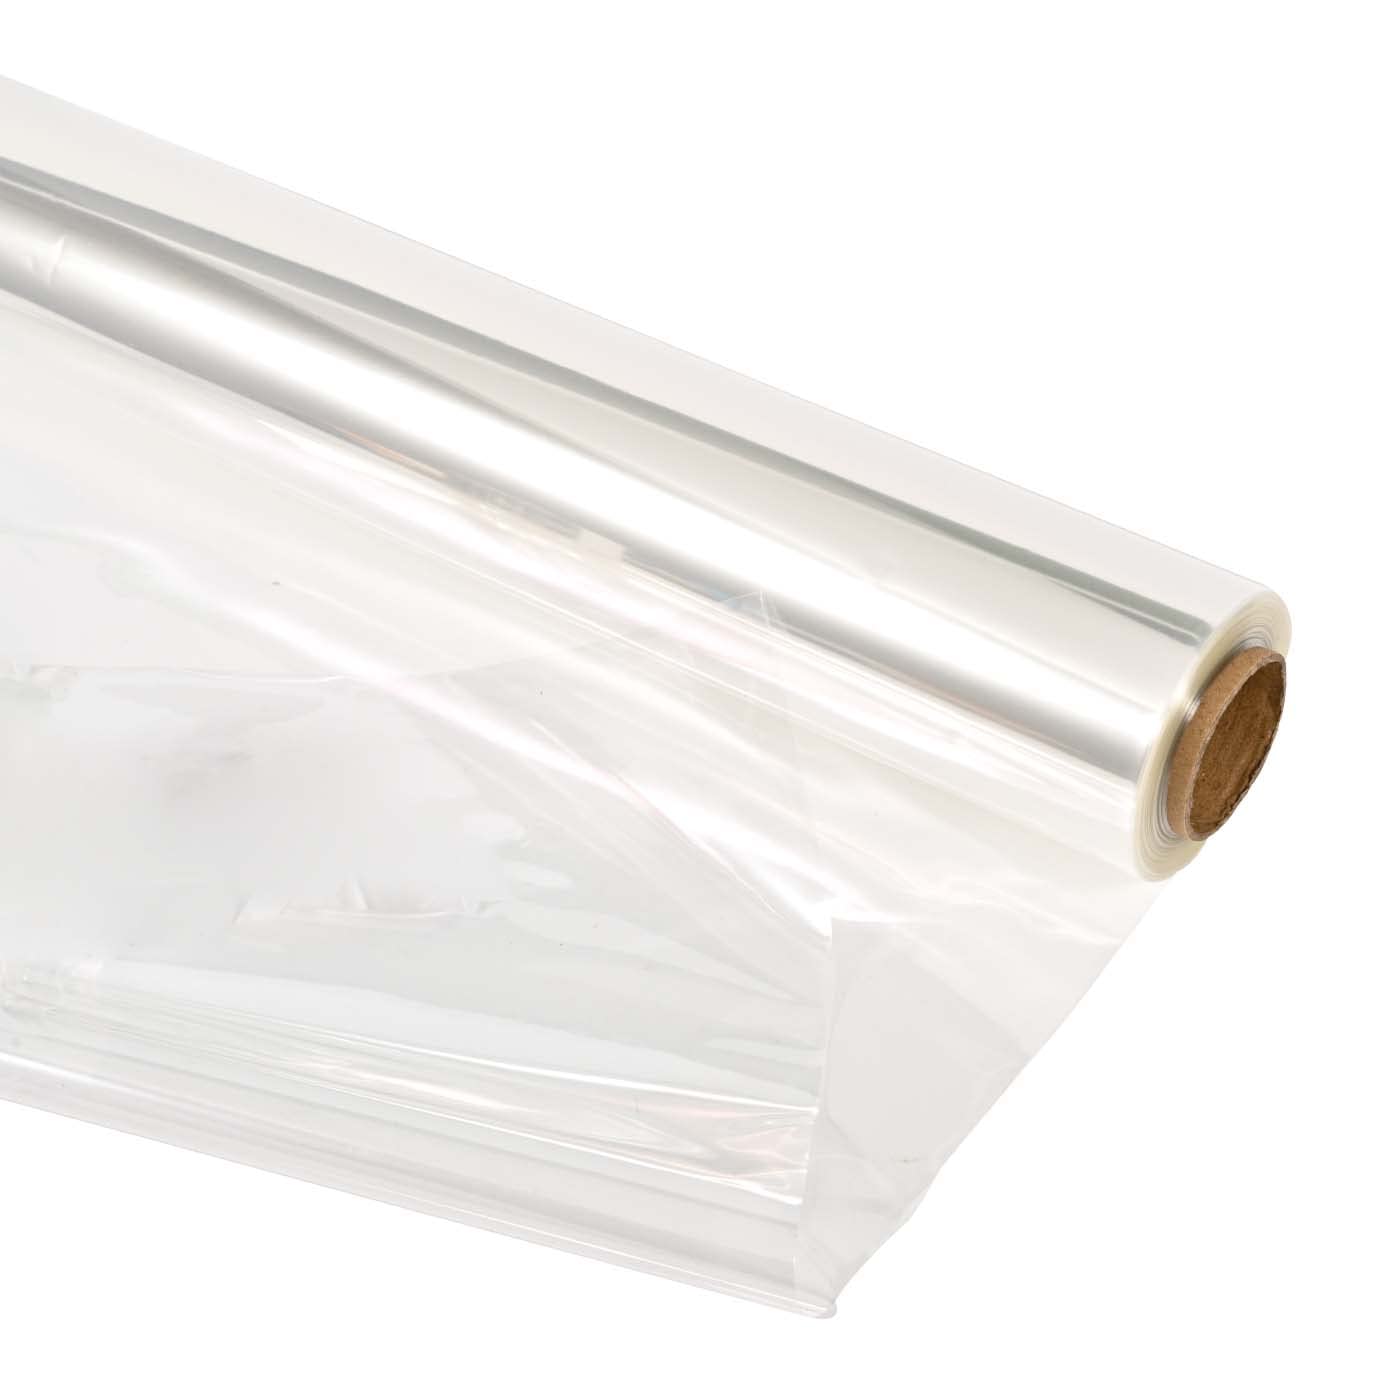 WICKELN Cellophane Wrap For Gift Baskets 100ft (L) X 31.5 Inches (W) Folded To 16 Inches For Easy Storage, 3 Mil Thick Sheer And Clear Cellophane Wrap Roll Perfect For Easter Basket Wrap,Craft,Flower